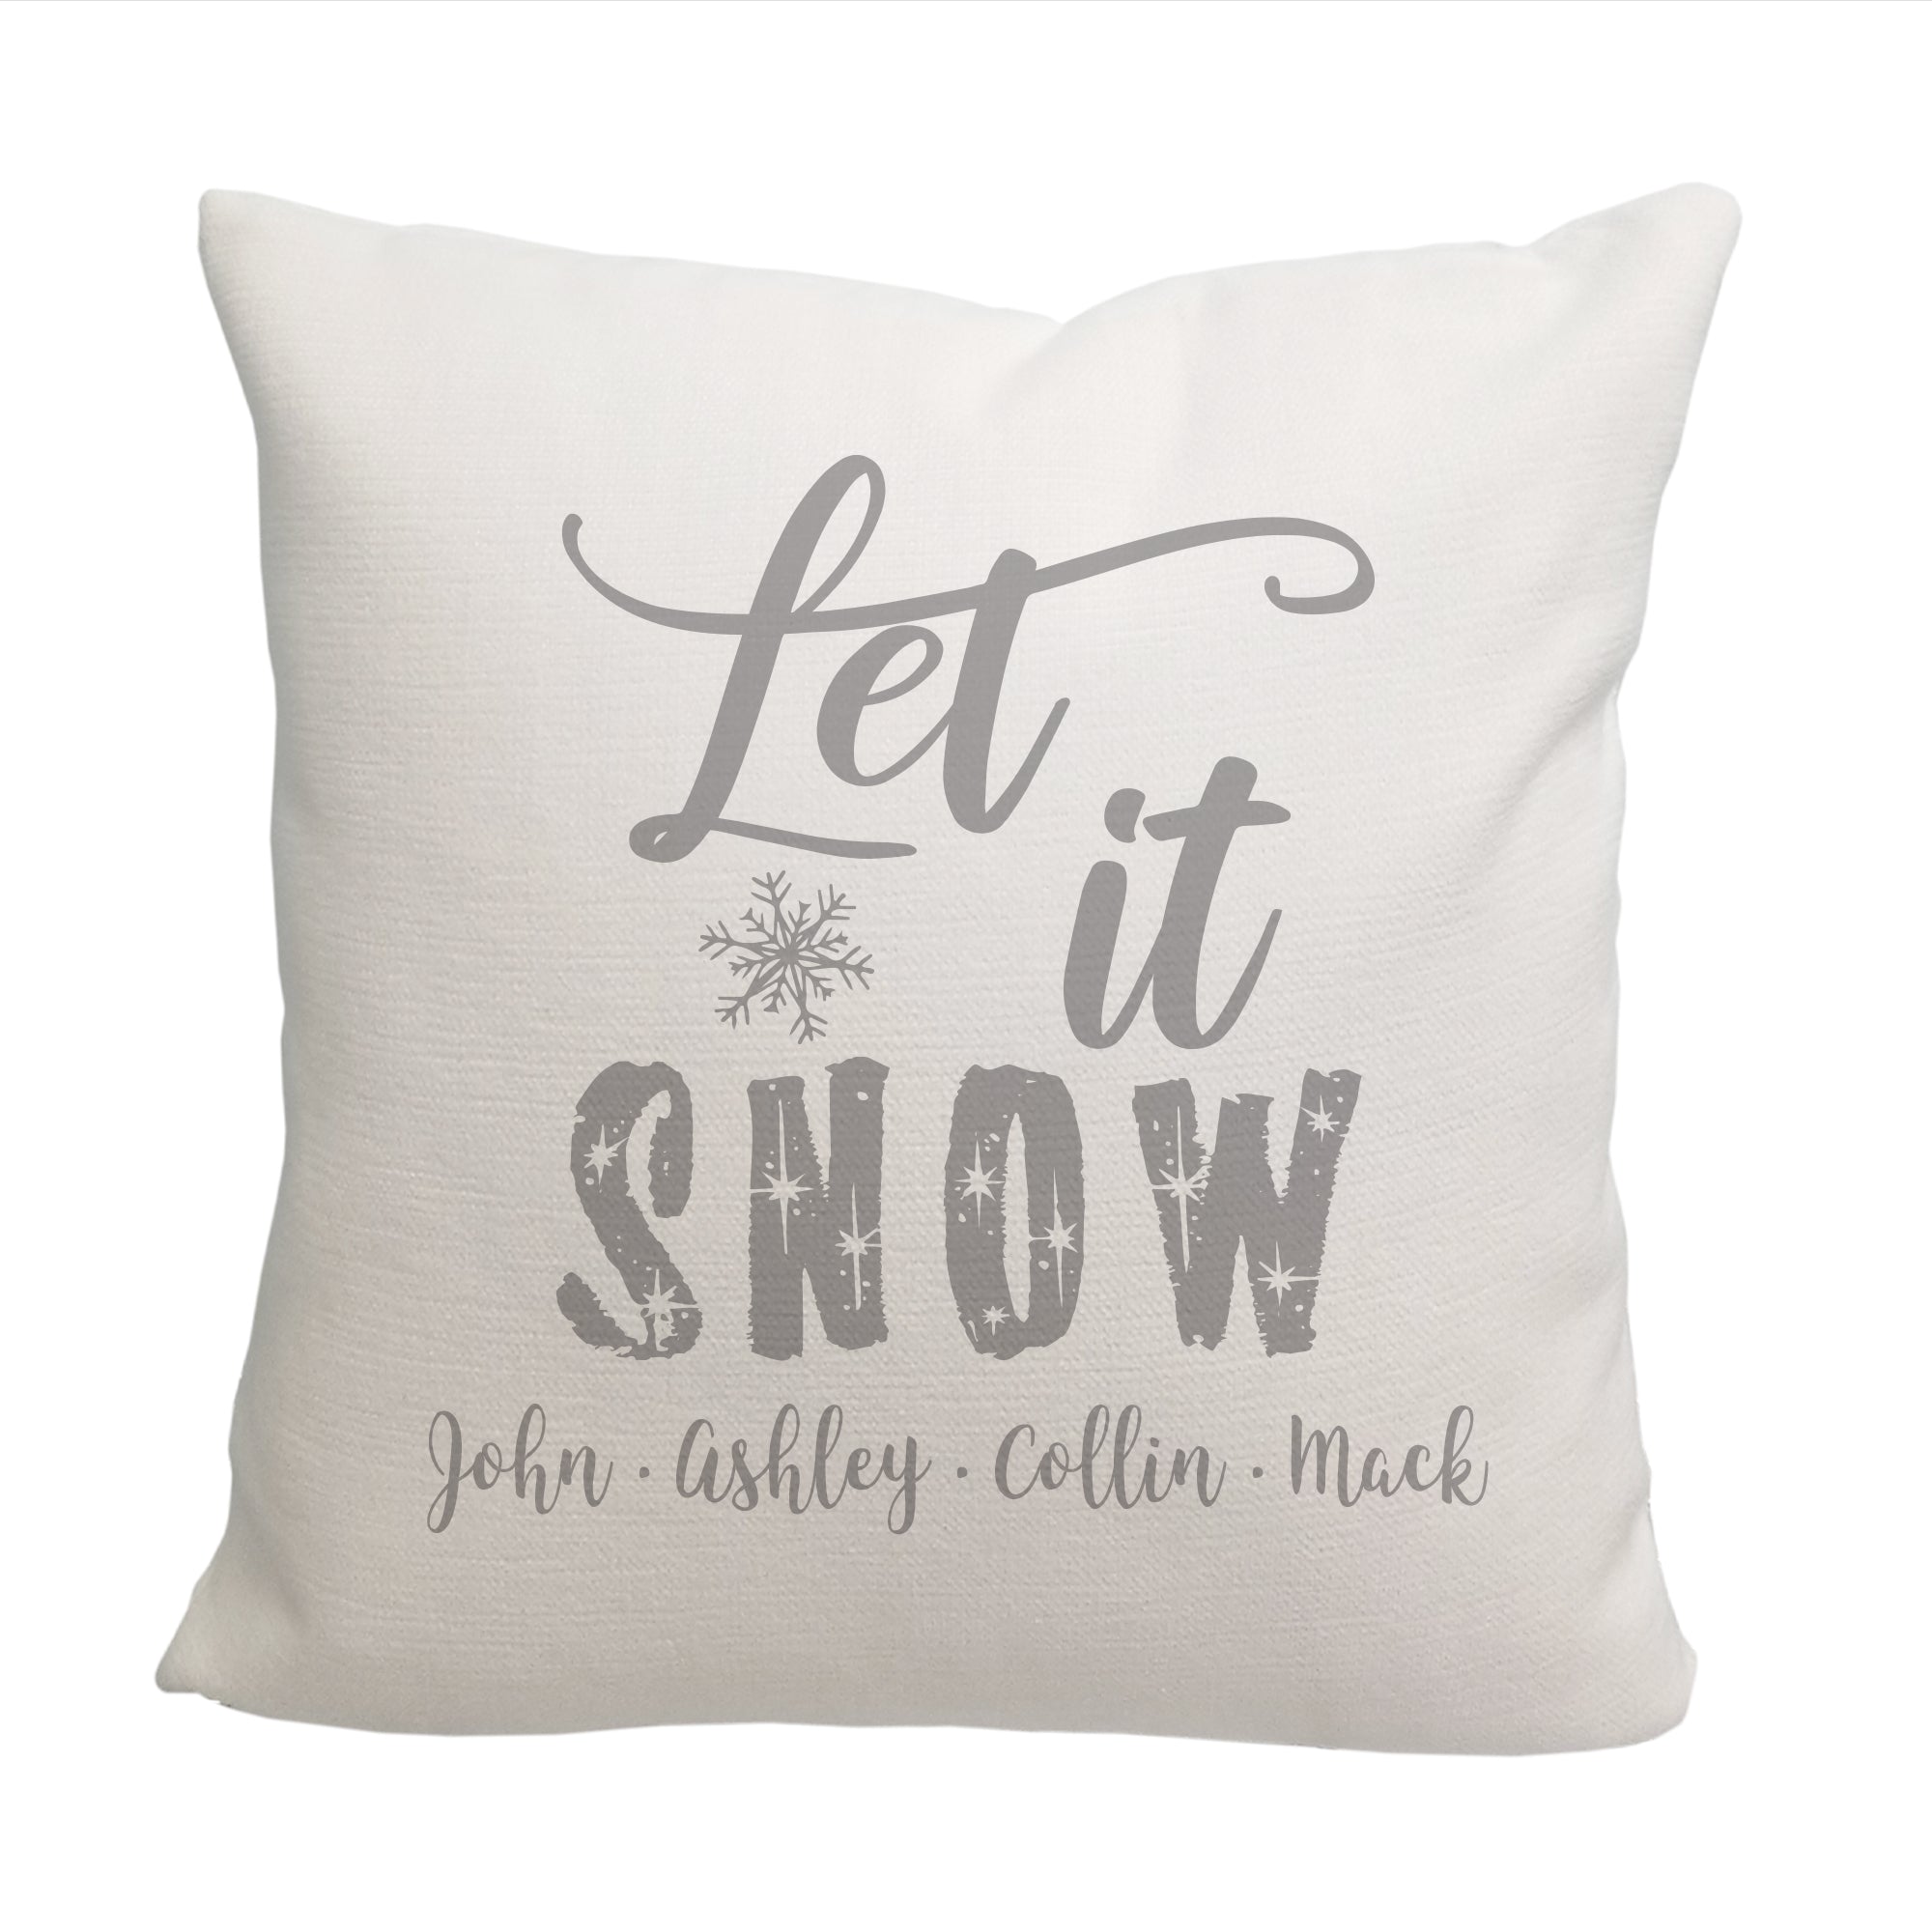 Let it Snow Throw Pillow - Cover Only OR Cover with Insert